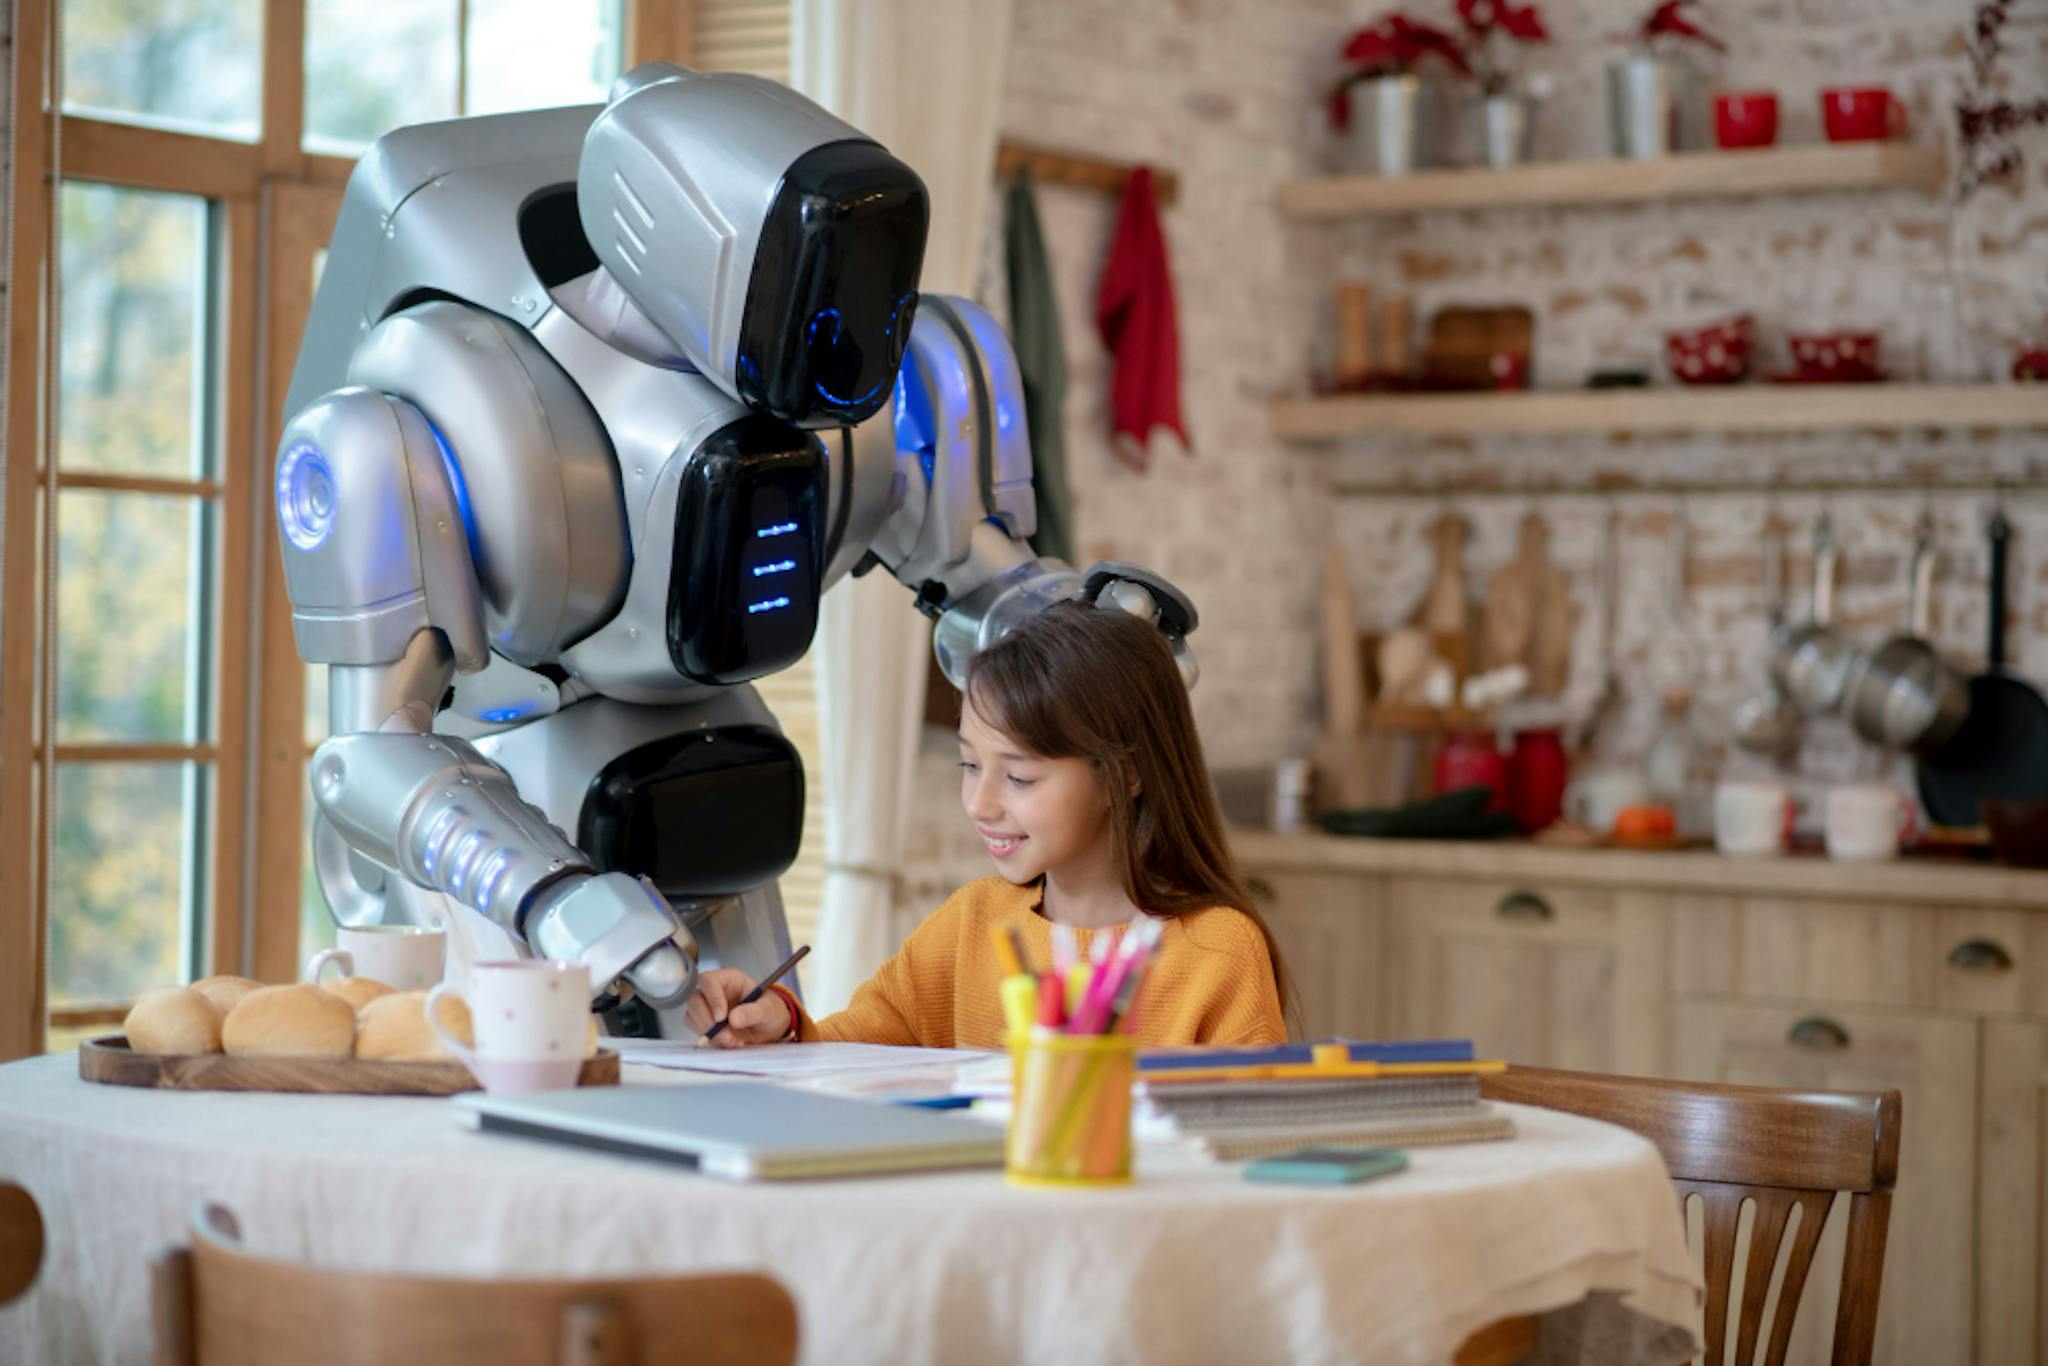 The compatibility between extant learning modes and expected AI solutions is often left out of the larger discourse on AI in education.